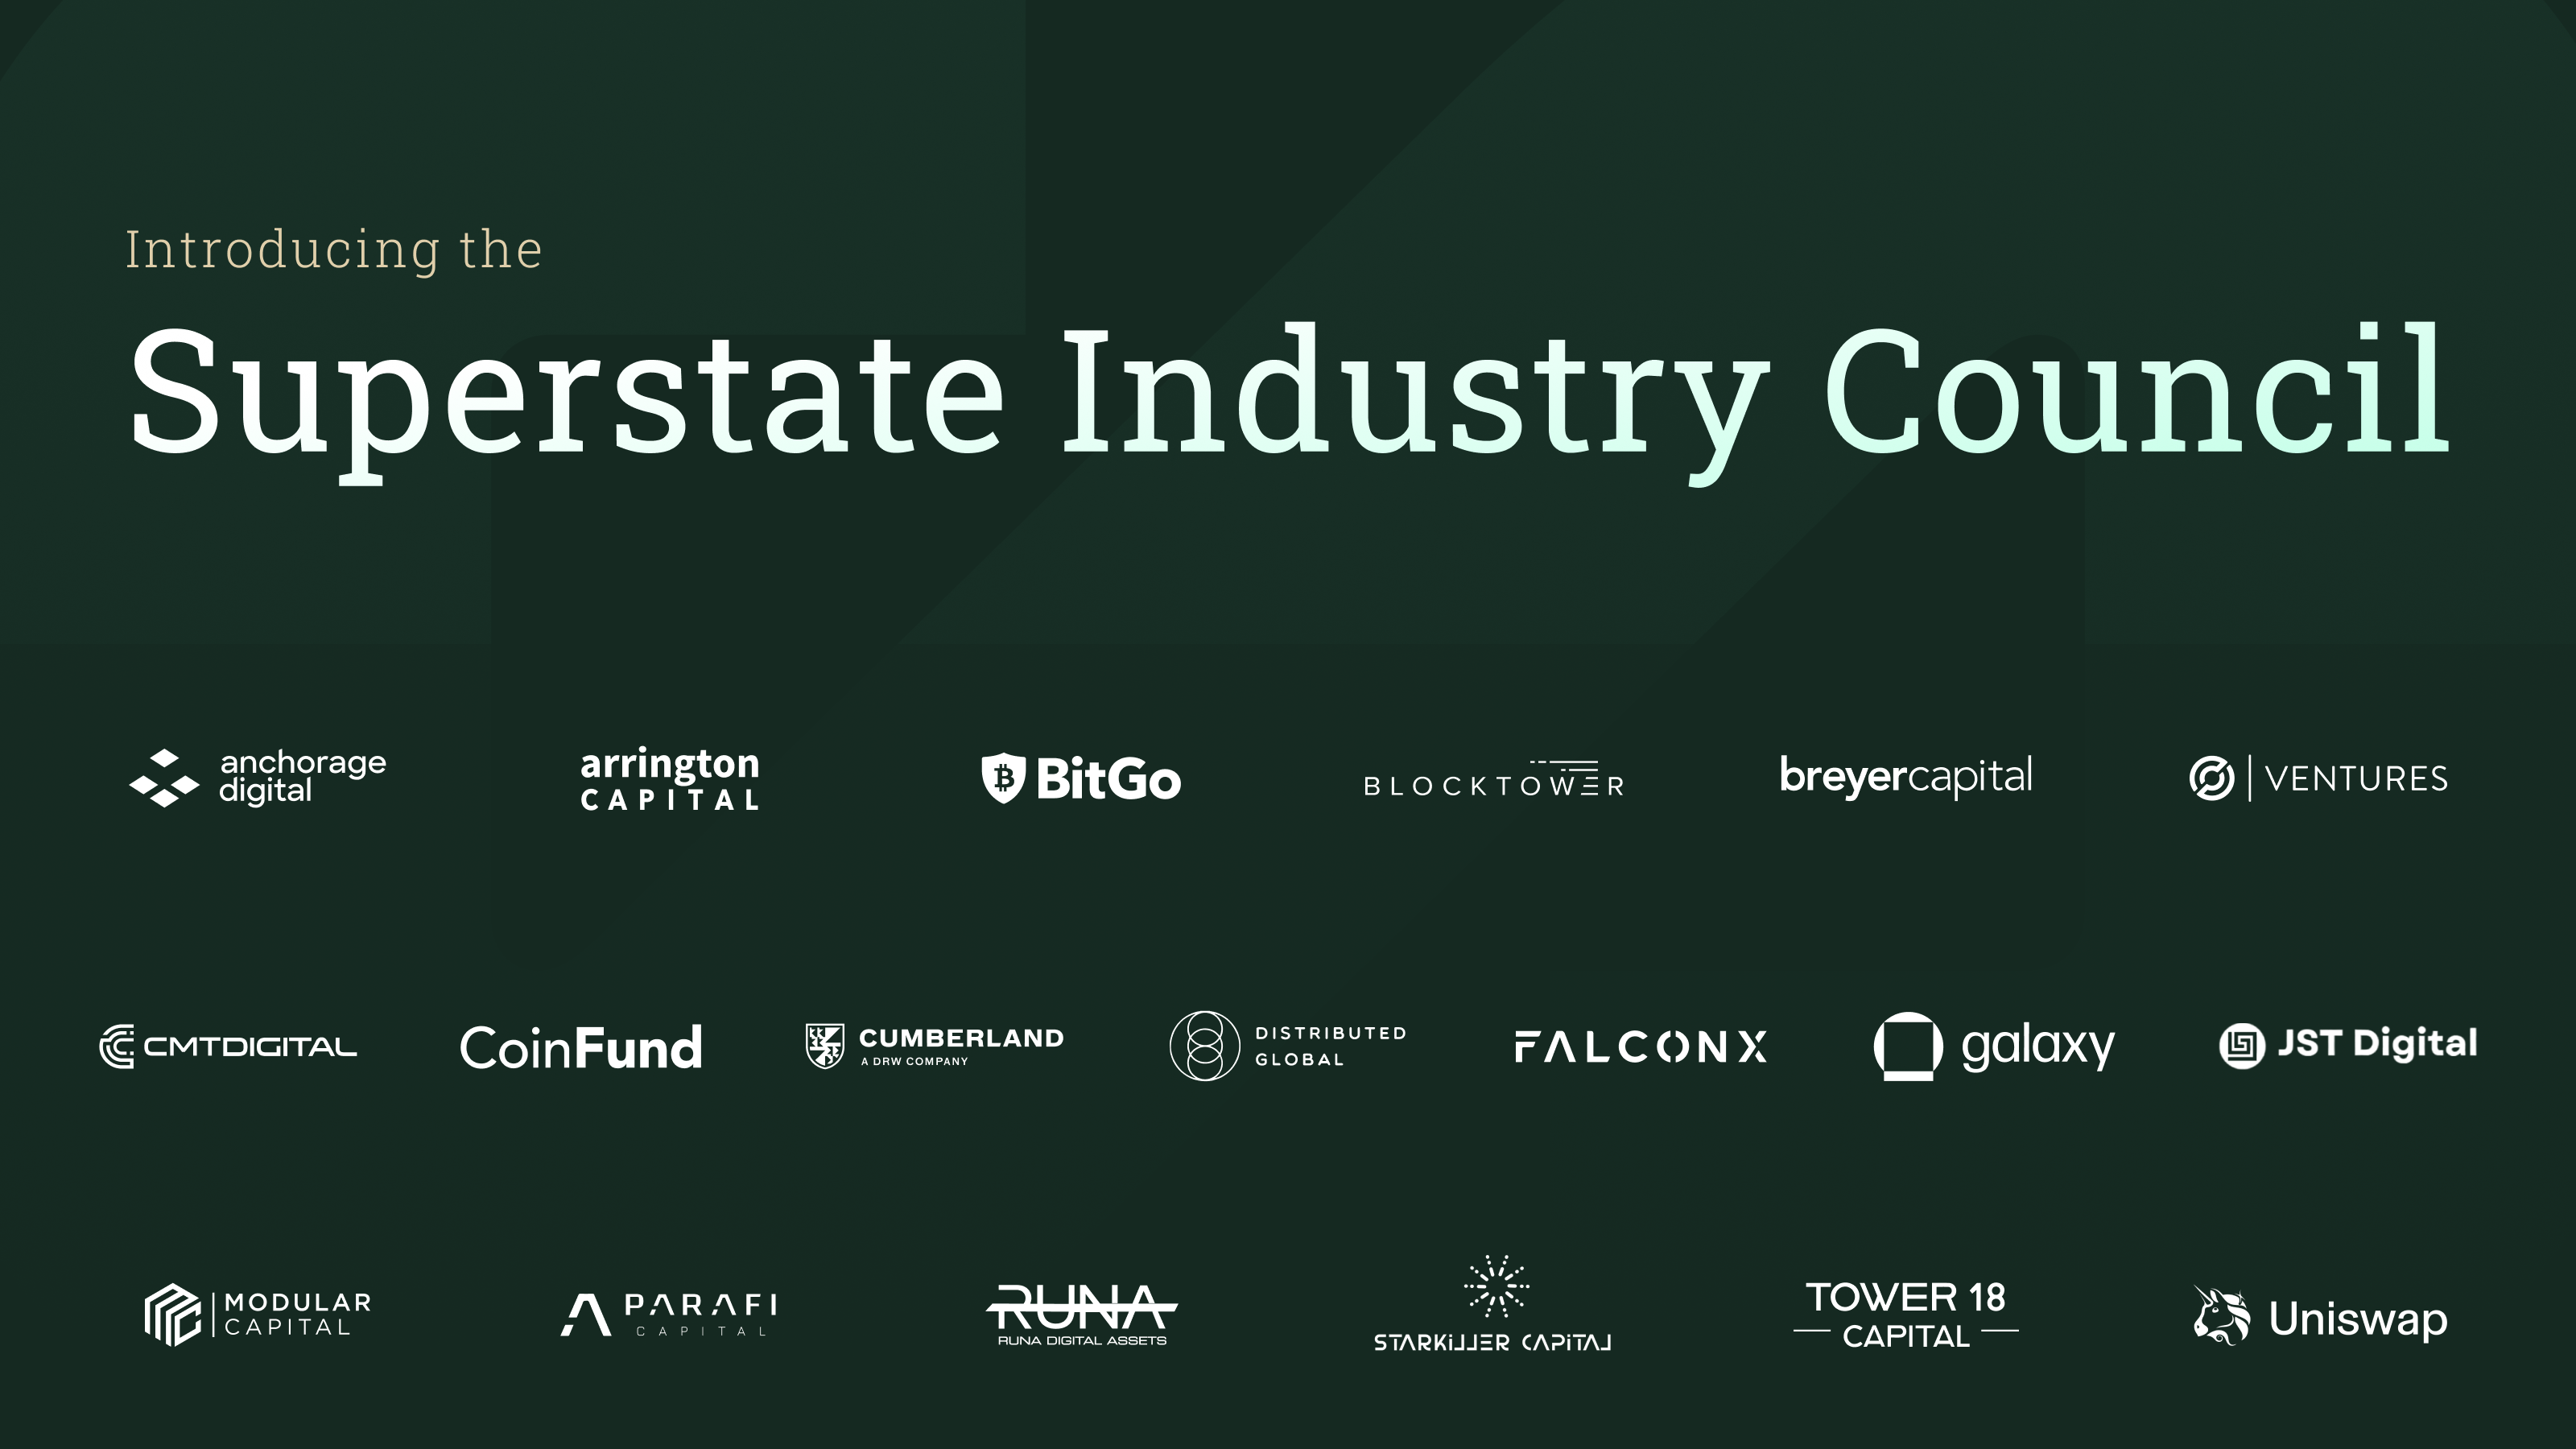 Introducing the Superstate Industry Council (SIC)